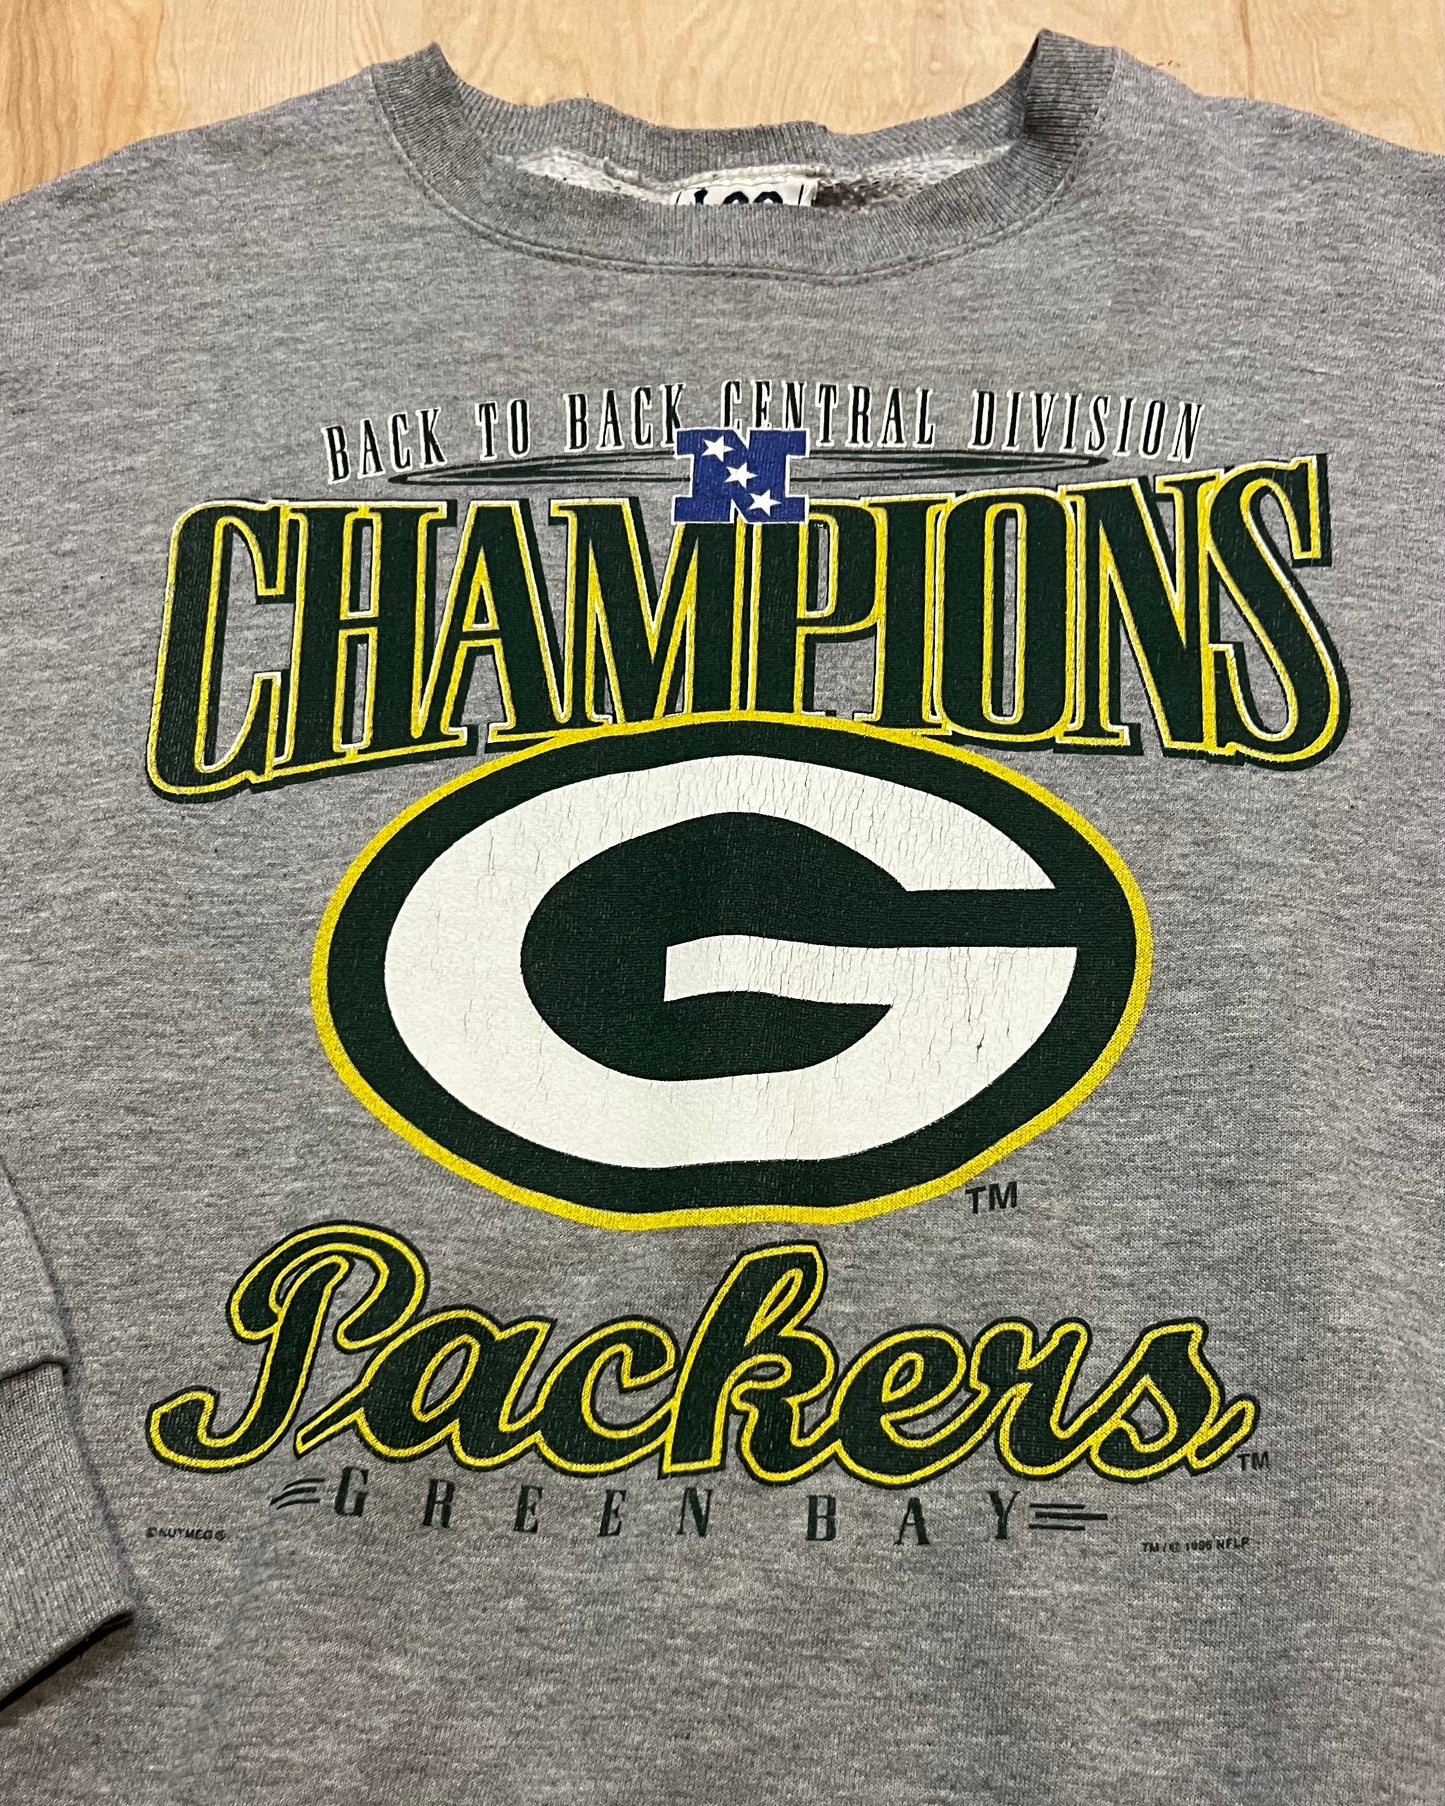 1995 Green Bay Packers Back to Back Division Champions Lee Sports Crewneck